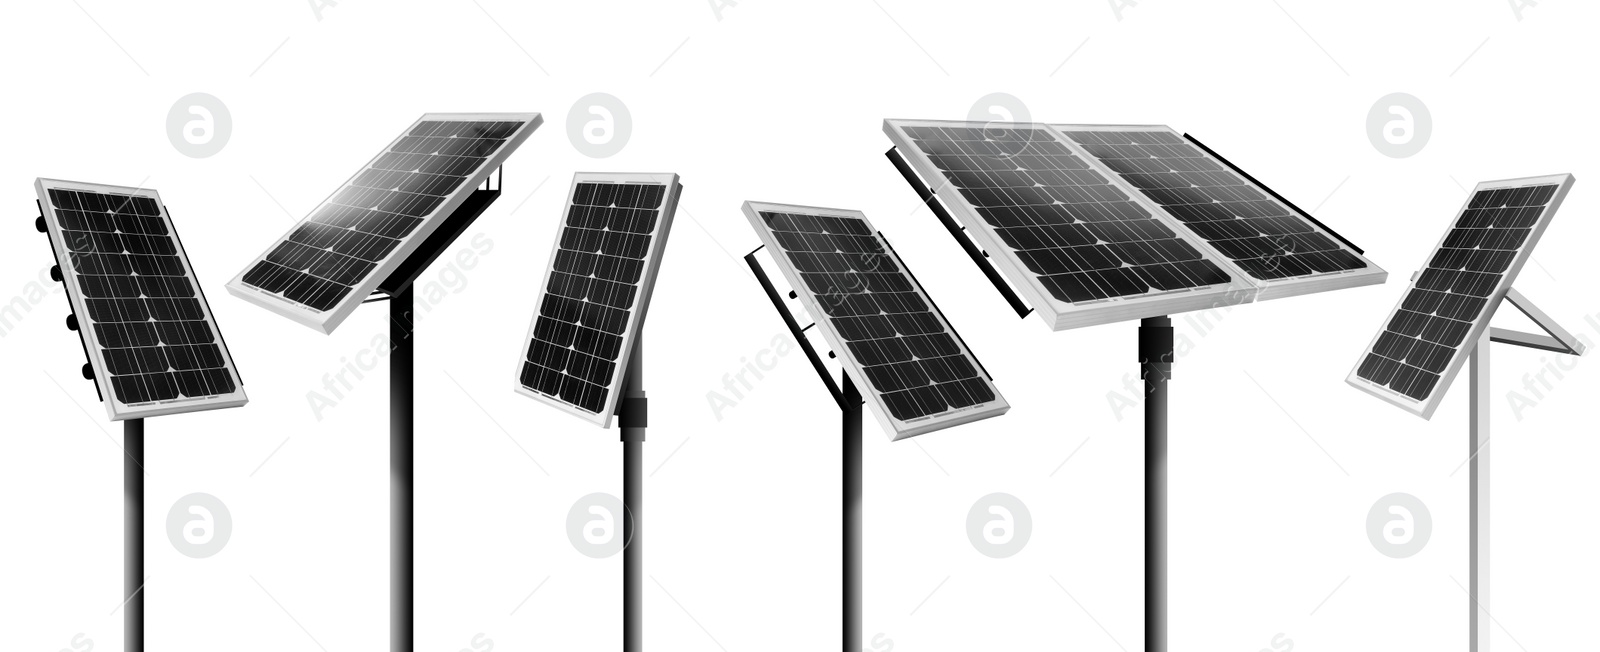 Image of Set with different solar panels on white background, banner design. Alternative energy source 